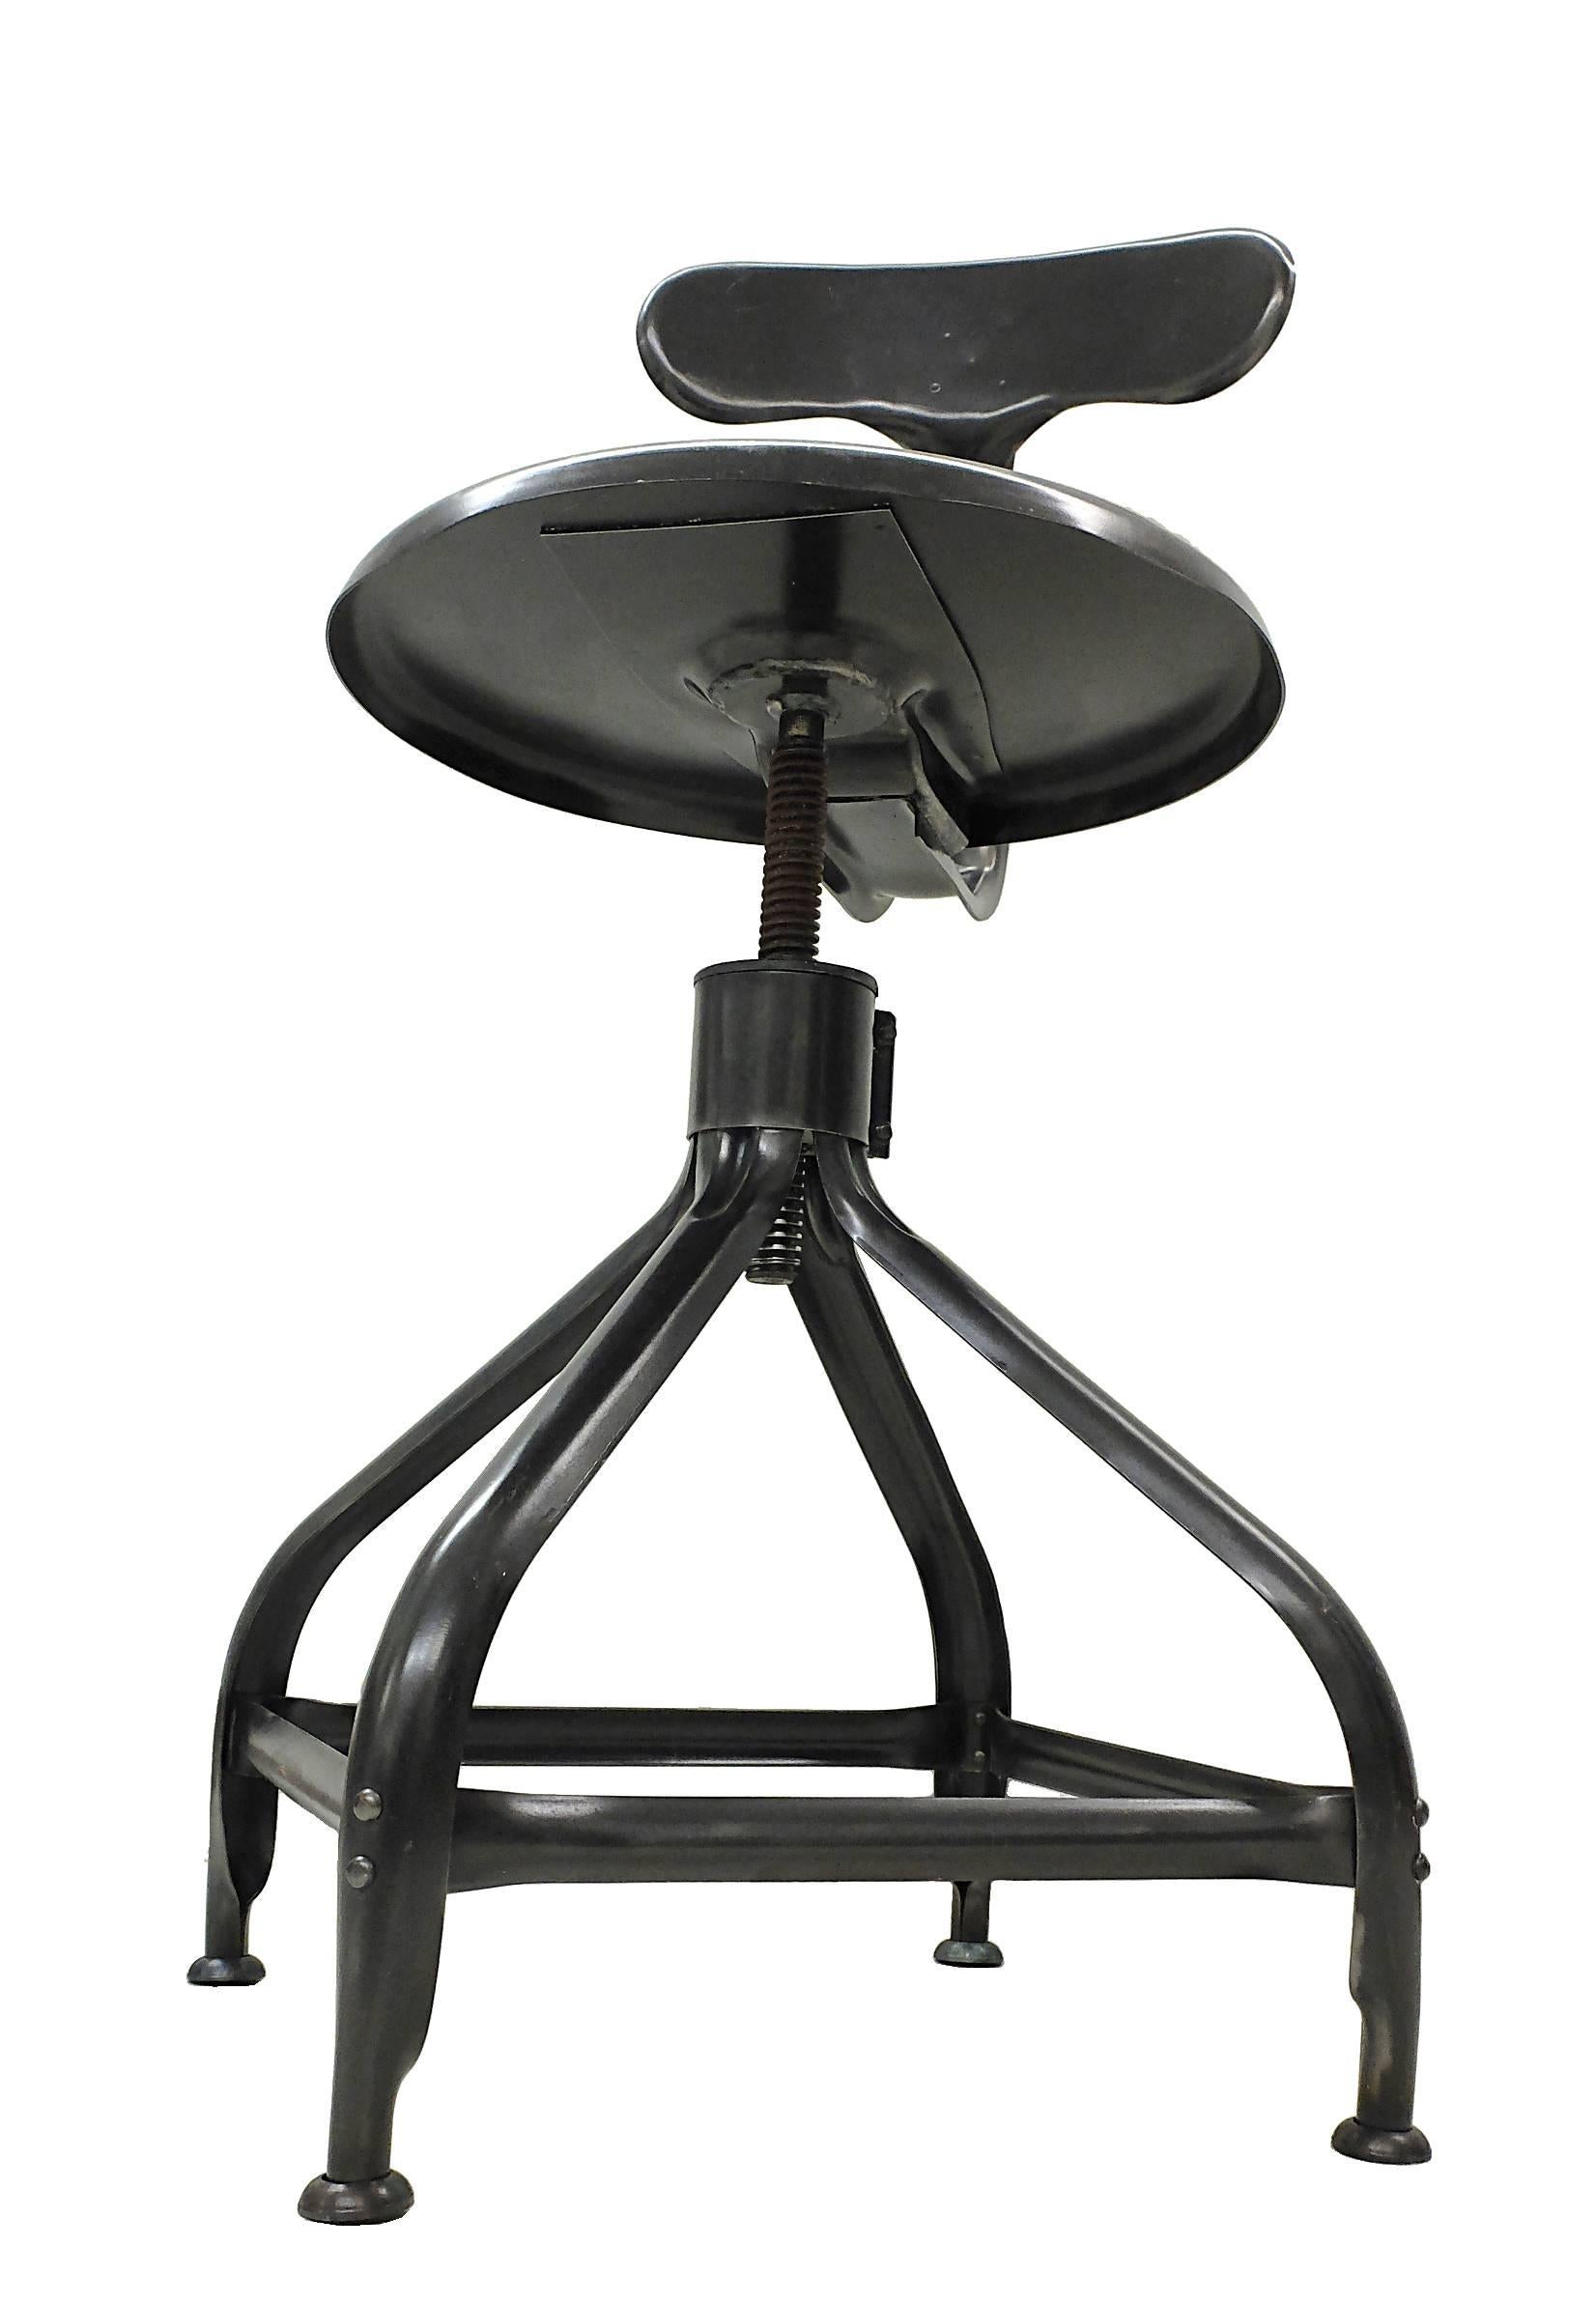 Iron Industrial Working Adjustable Chair ' Nicole', Six Available, France, 1945